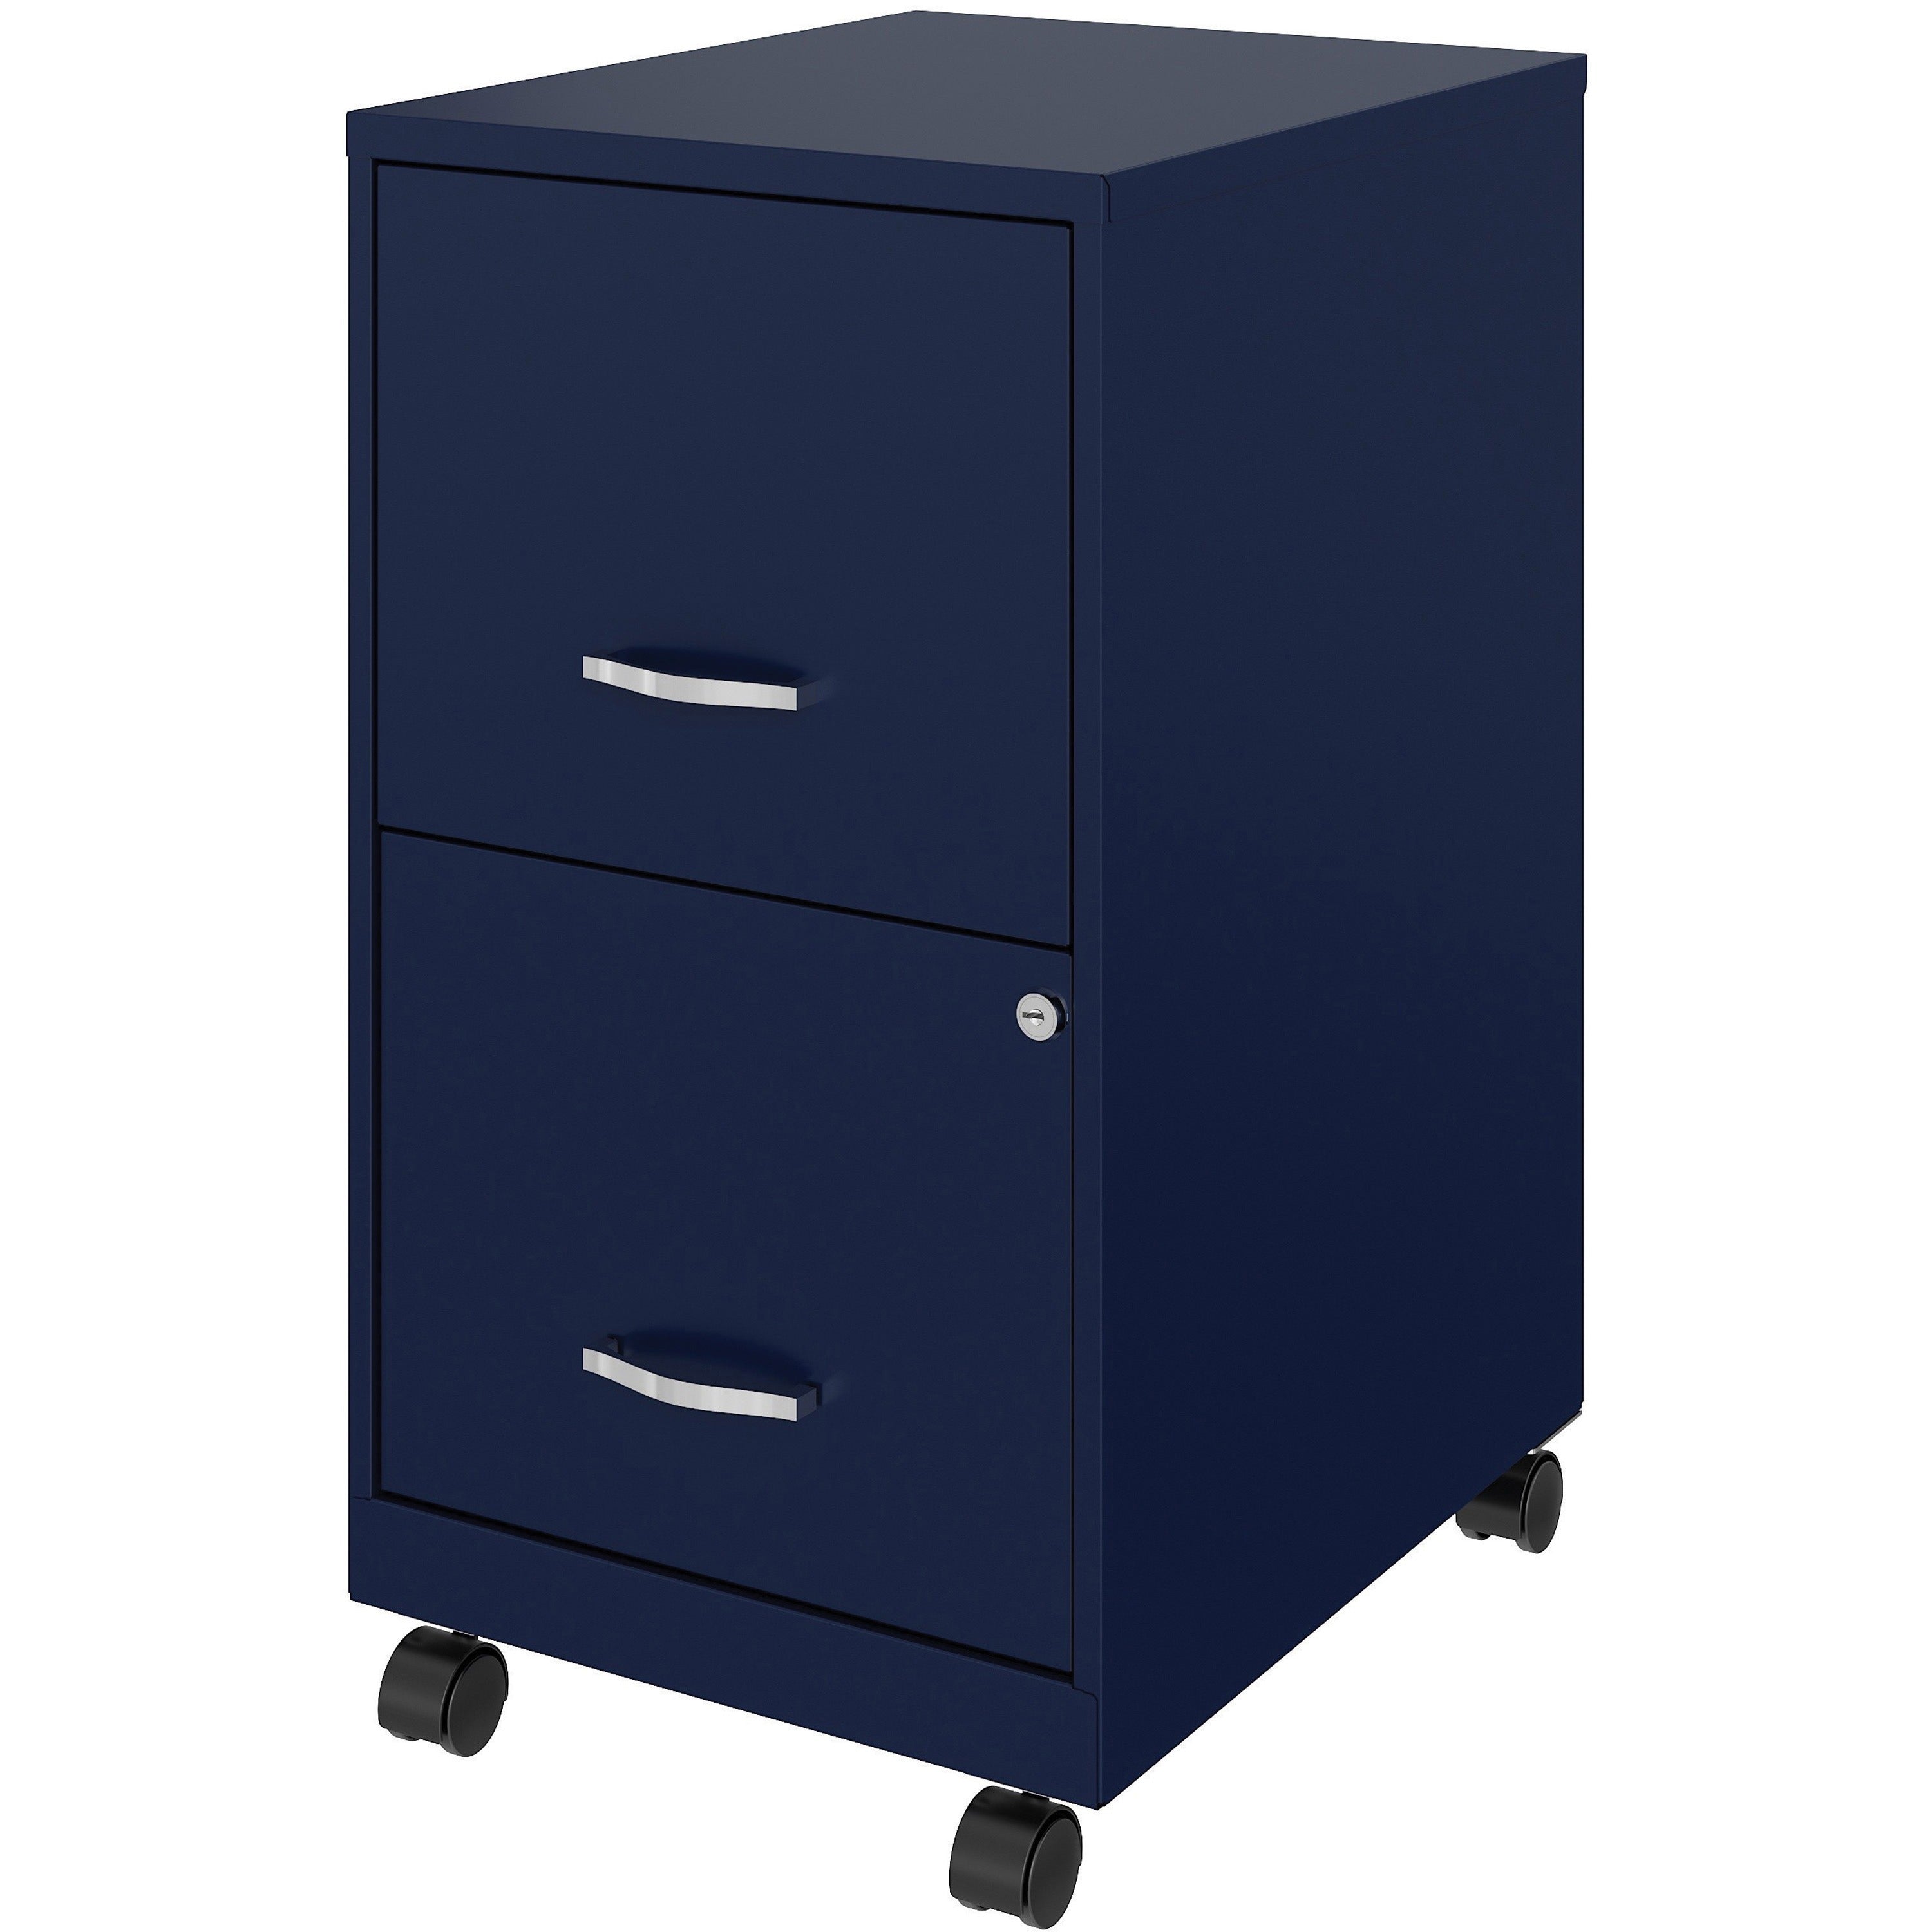 nusparc-mobile-file-cabinet-142-x-18-x-265-for-file-letter-mobility-locking-drawer-glide-suspension-3-4-drawer-extension-cam-lock-nonporous-surface-blue-painted-steel-steel-recycled-assembly-required_nprvf218amny - 3